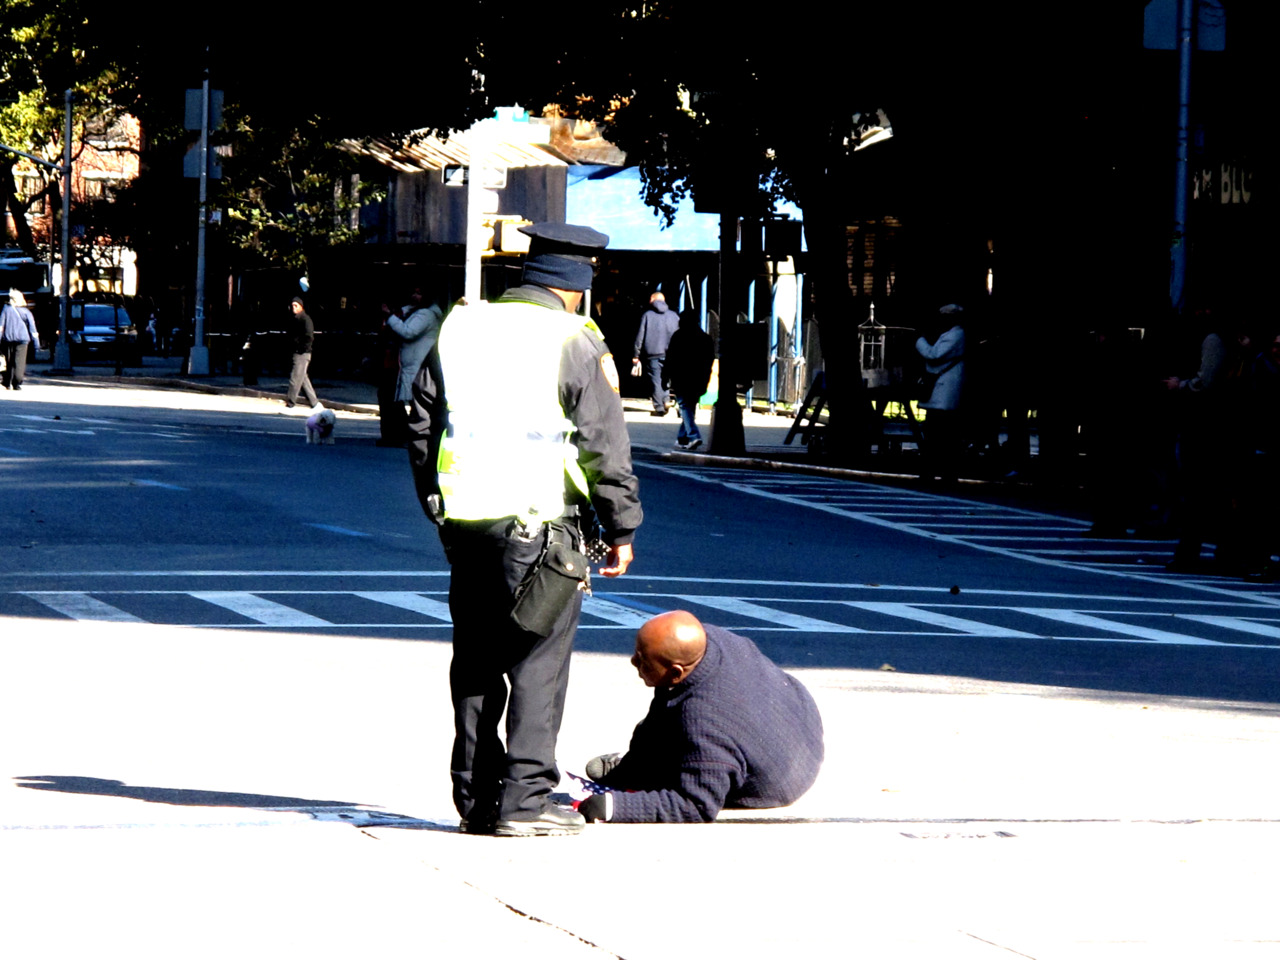 2  of 3 The man is checked to see if he is ok by the cop.